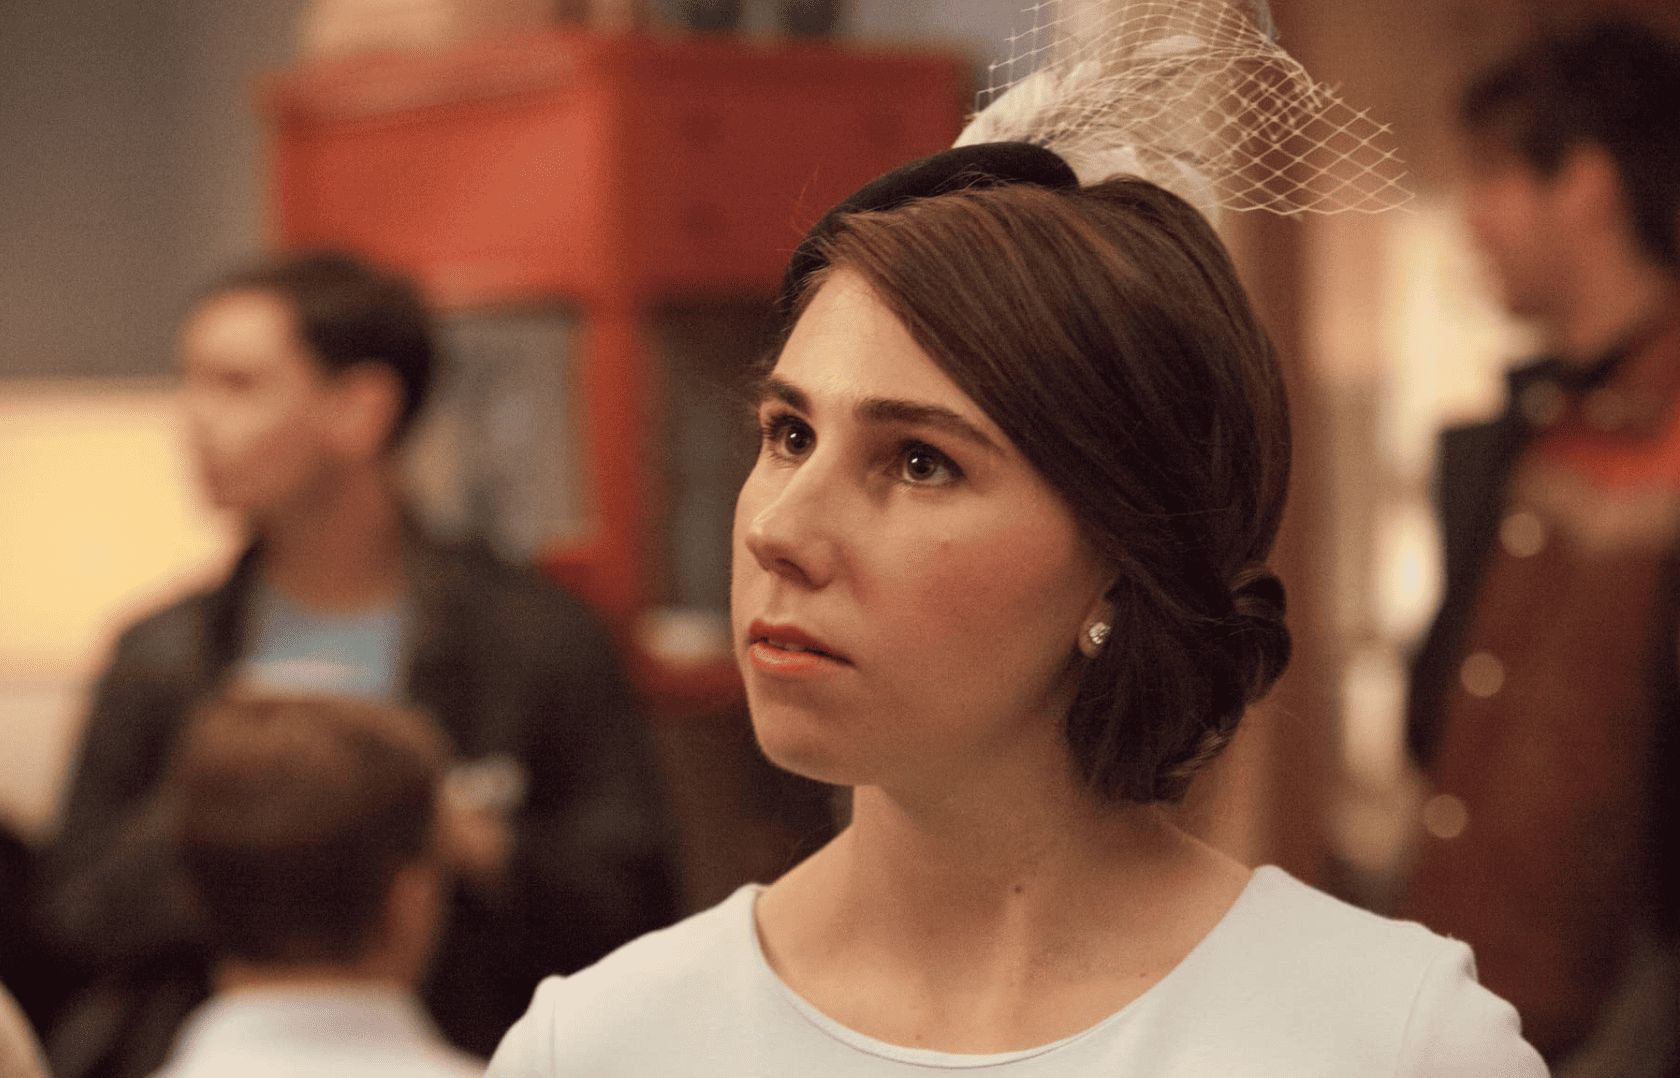 Shoshana is wearing a fascinator and soft-blue dress in this image from Apatow Productions.